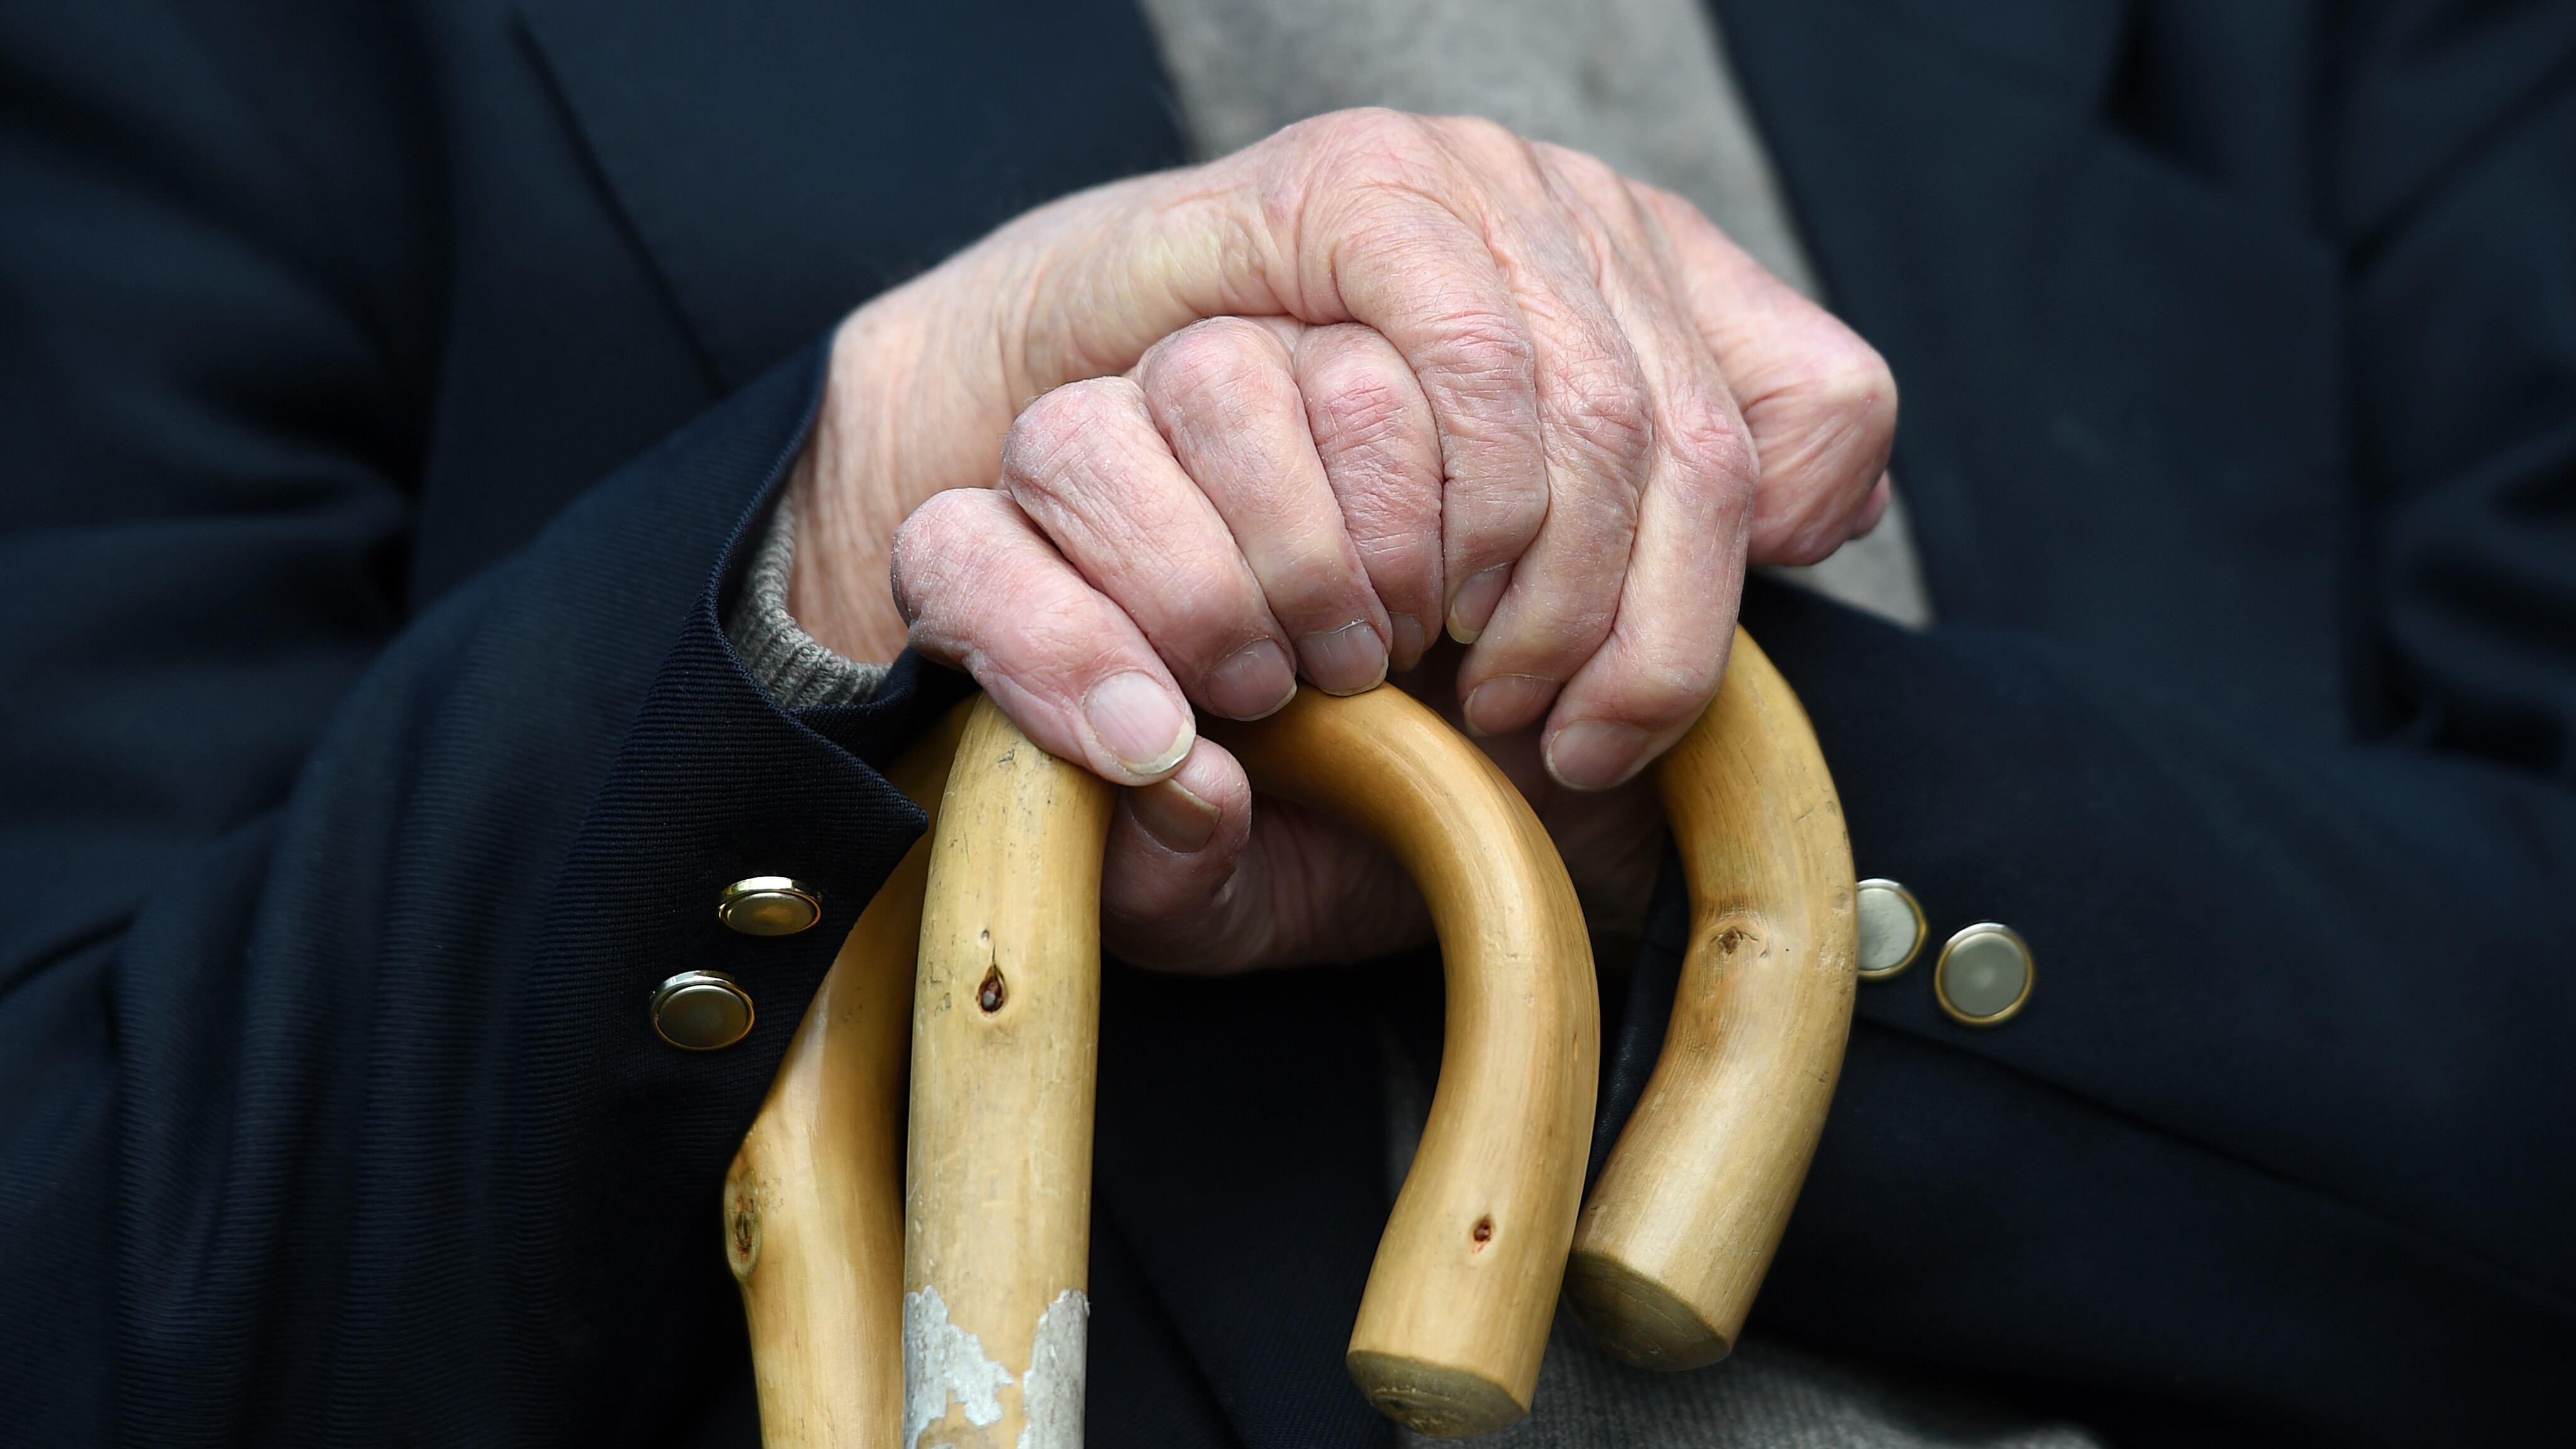 Some campaigners argue the elderly could be particularly at risk from a law change